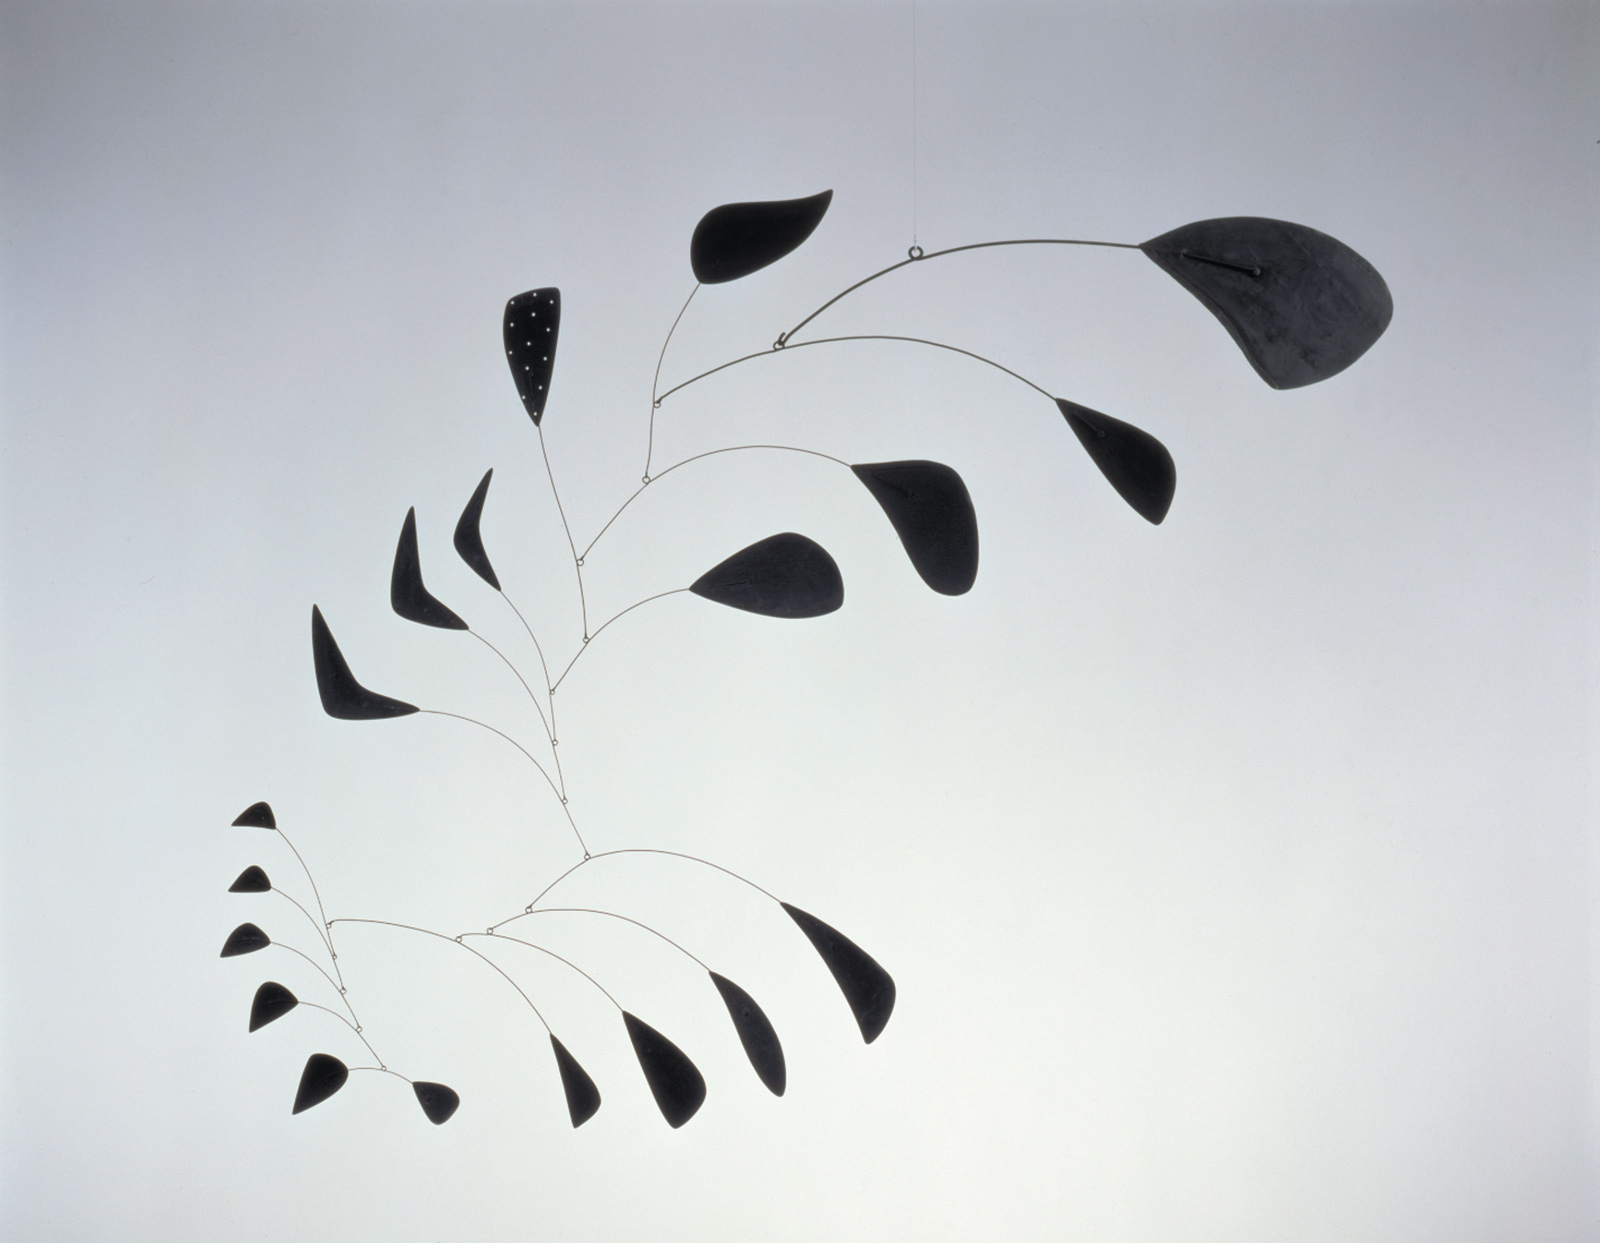 Alexander Calder: Vertical Foliage, sheet metal, wire, and paint, 53 1/2 x 66 inches, 1941